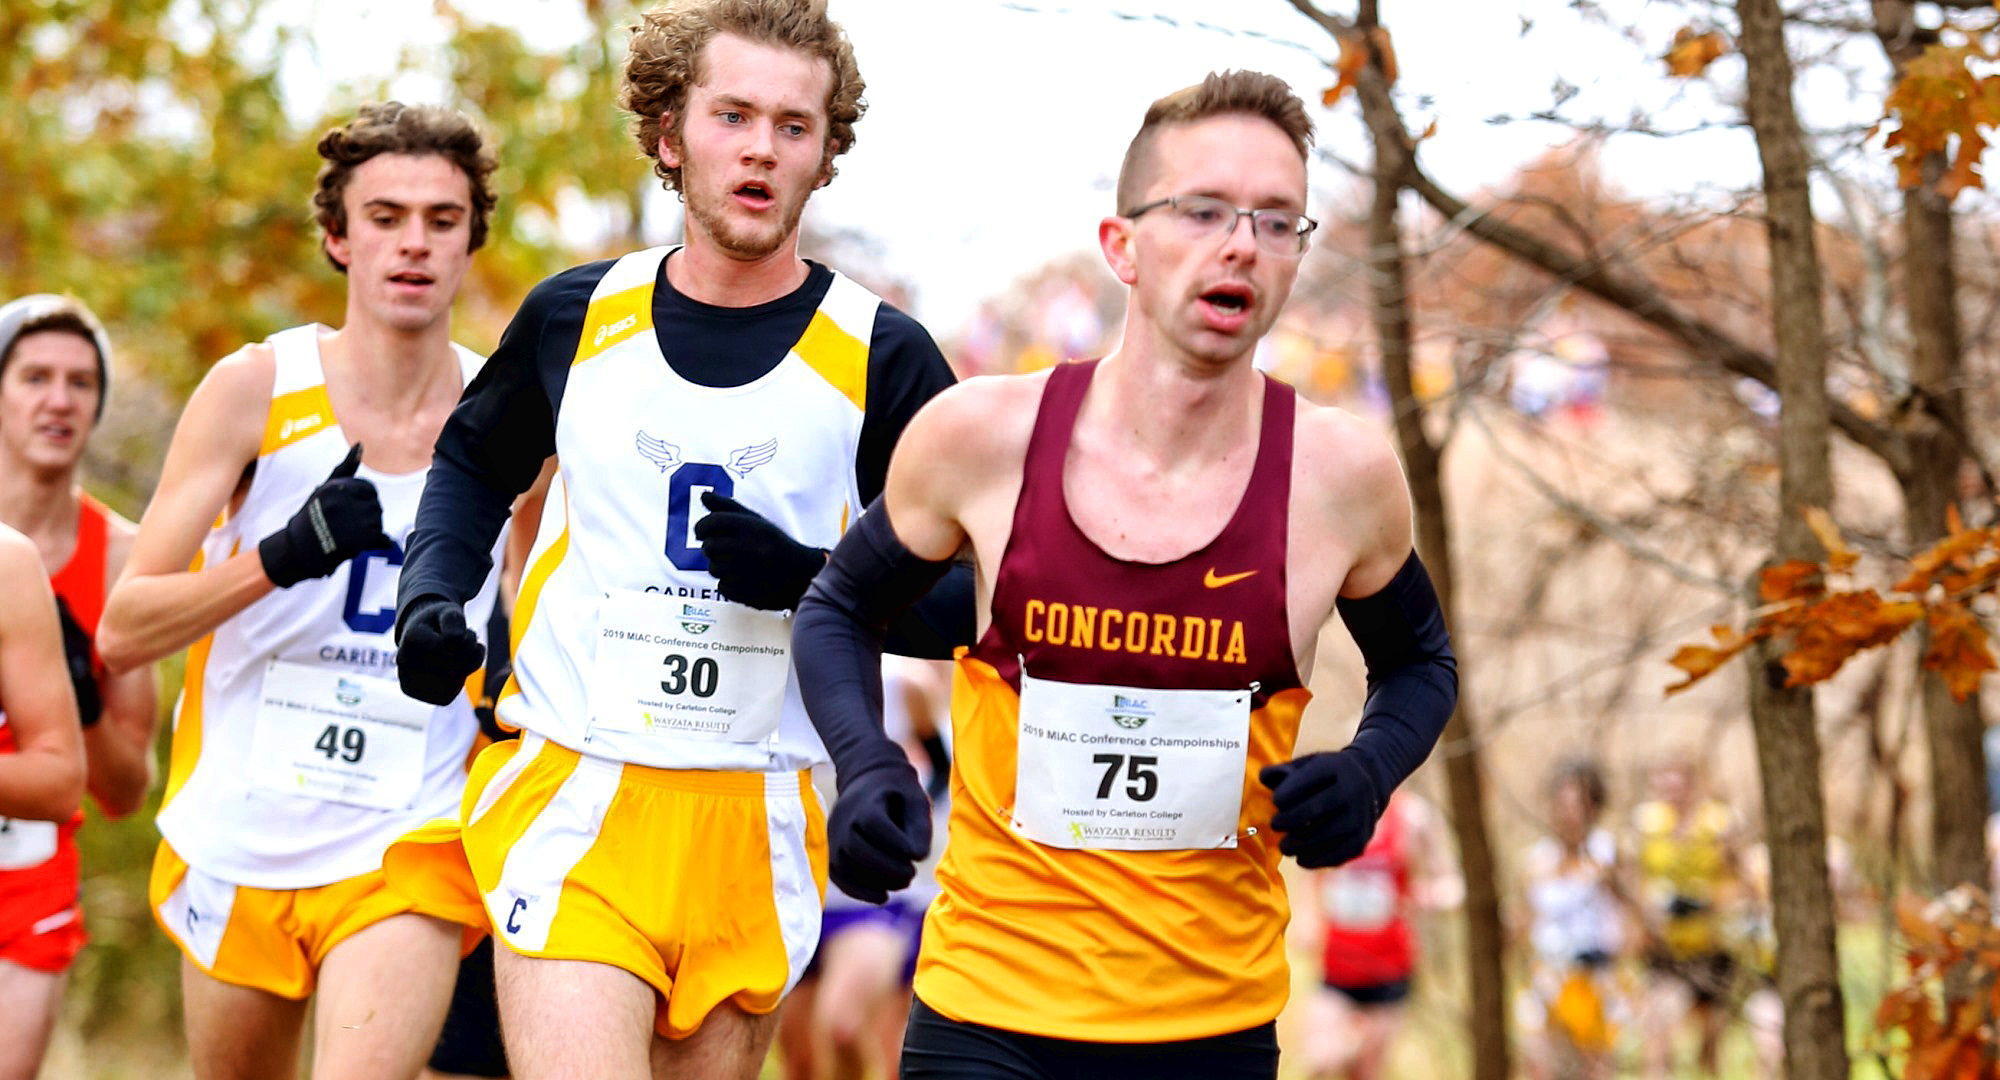 Senior Eric Wicklund races in the early stages of the MIAC Championship Meet. He went on to earn All-MIAC Honorable Mention honors. (Photo courtesy of Nathan Lodermeier)